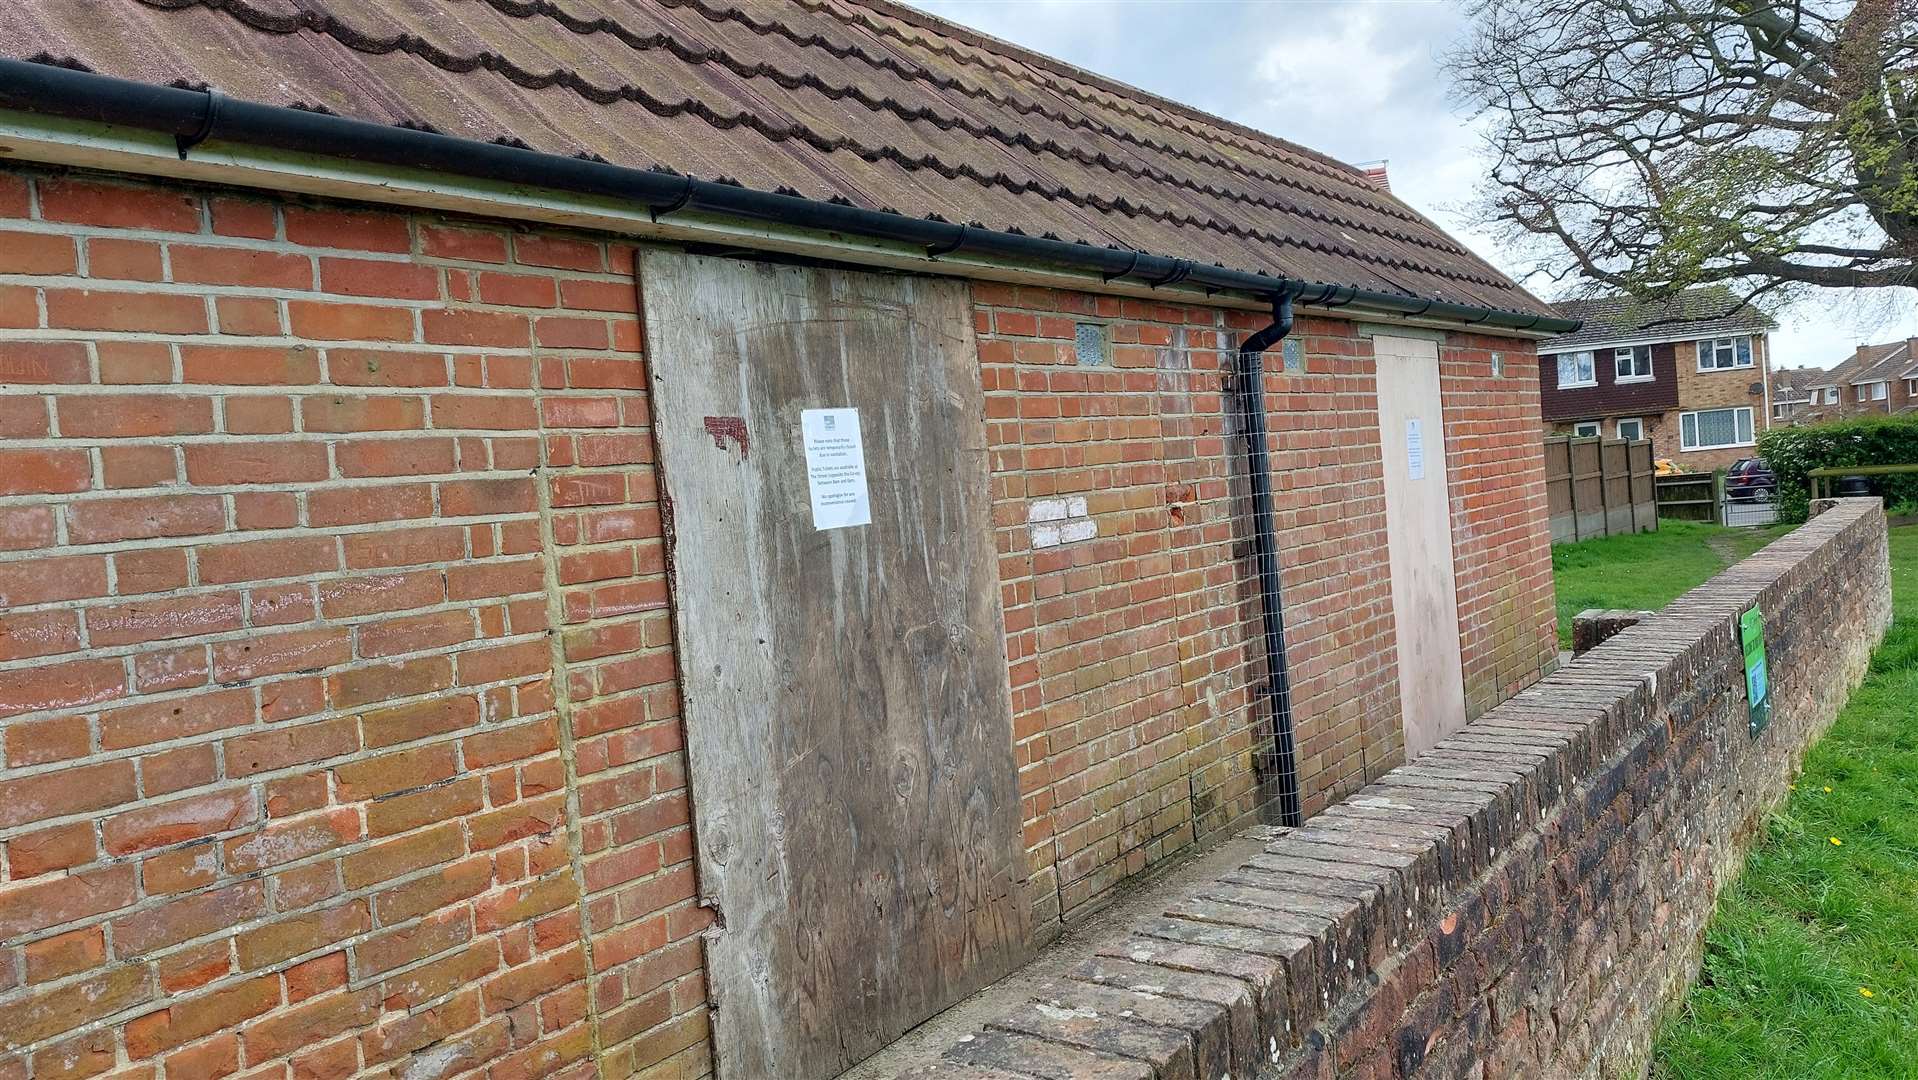 The public toilets at the recreation ground have been boarded up after they were vandalised